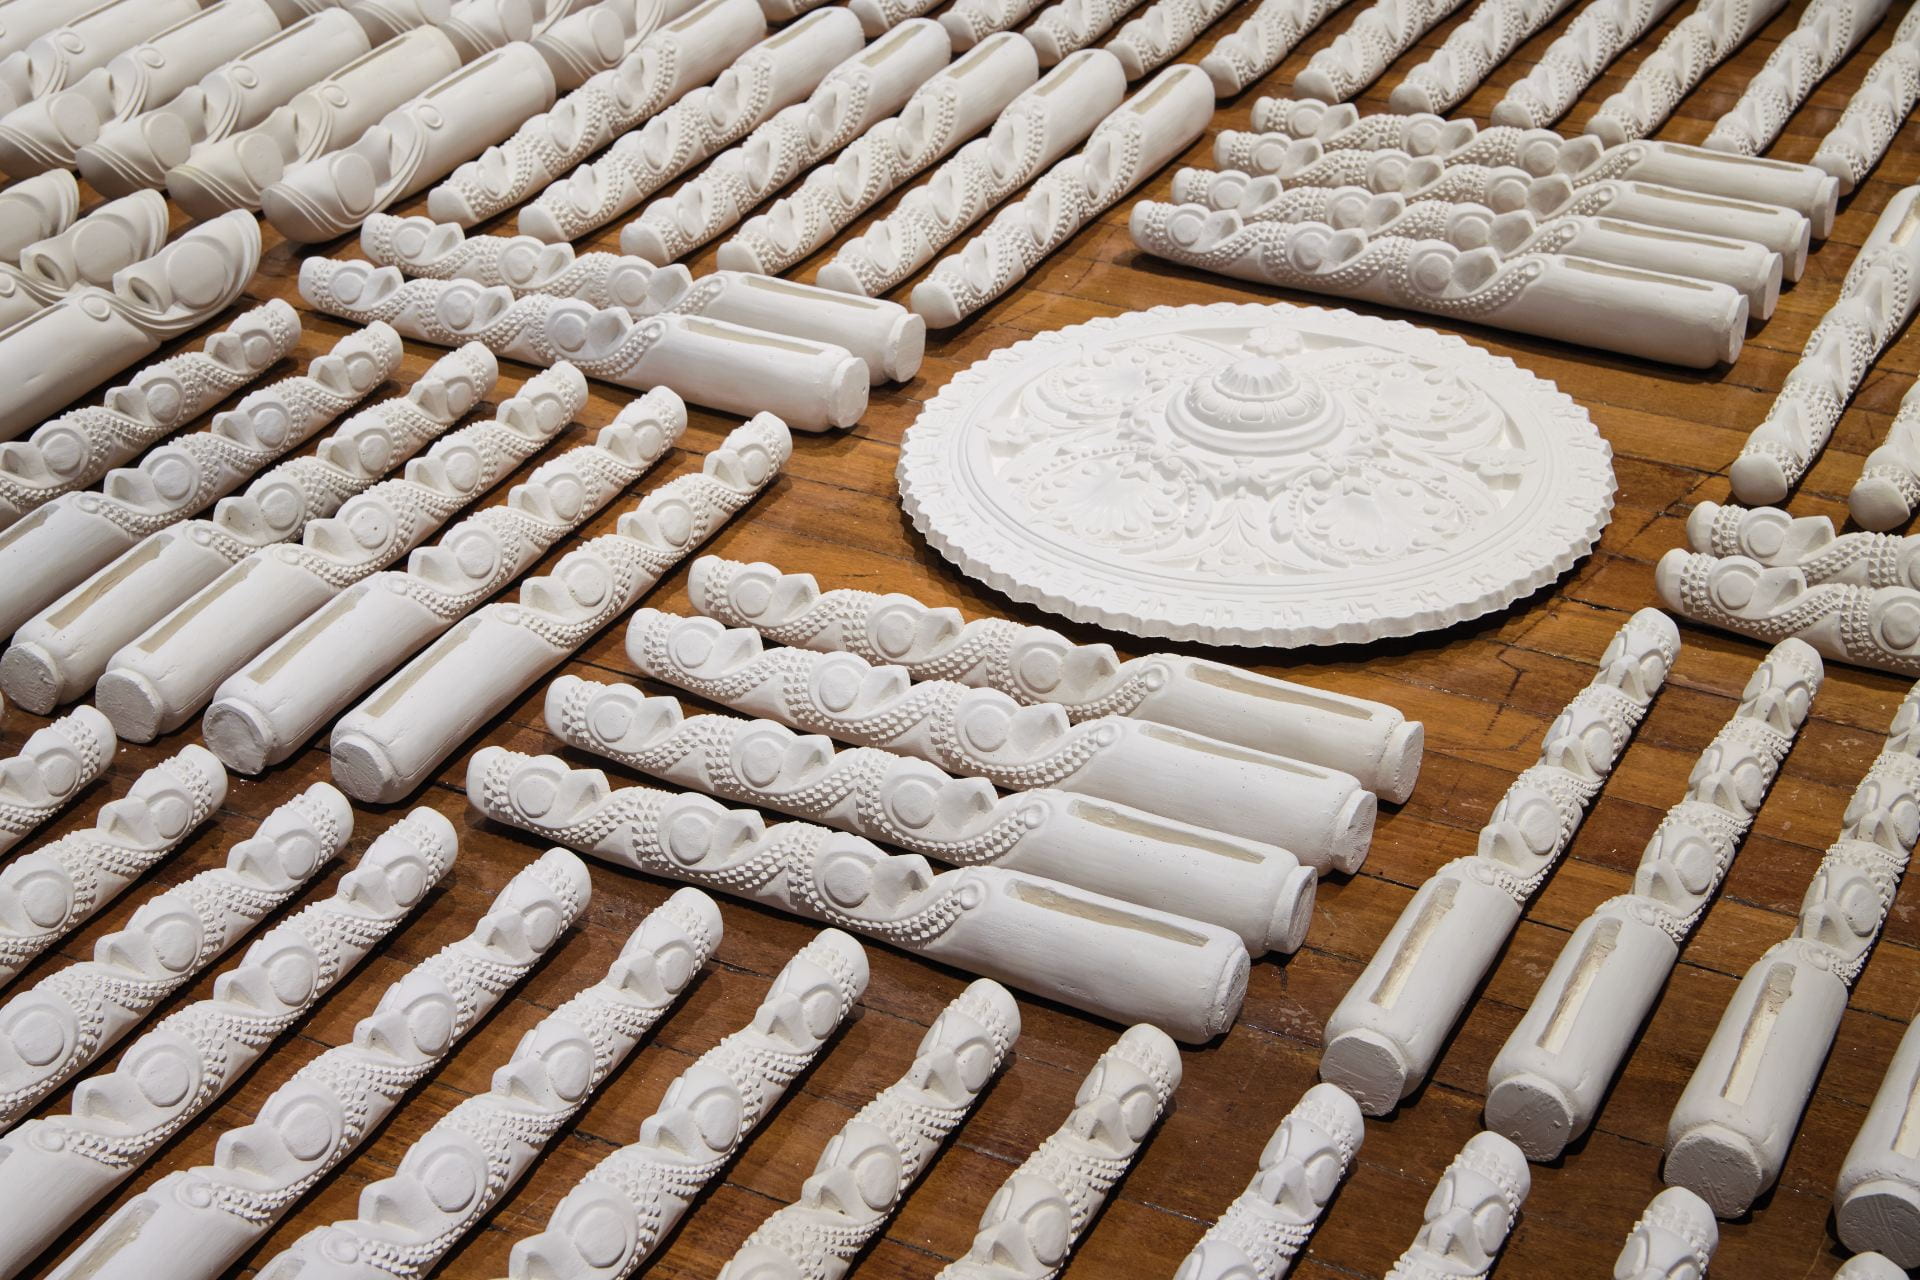 Rows of white carved sculptures placed on the floor surrounding a circular white plaster carving.